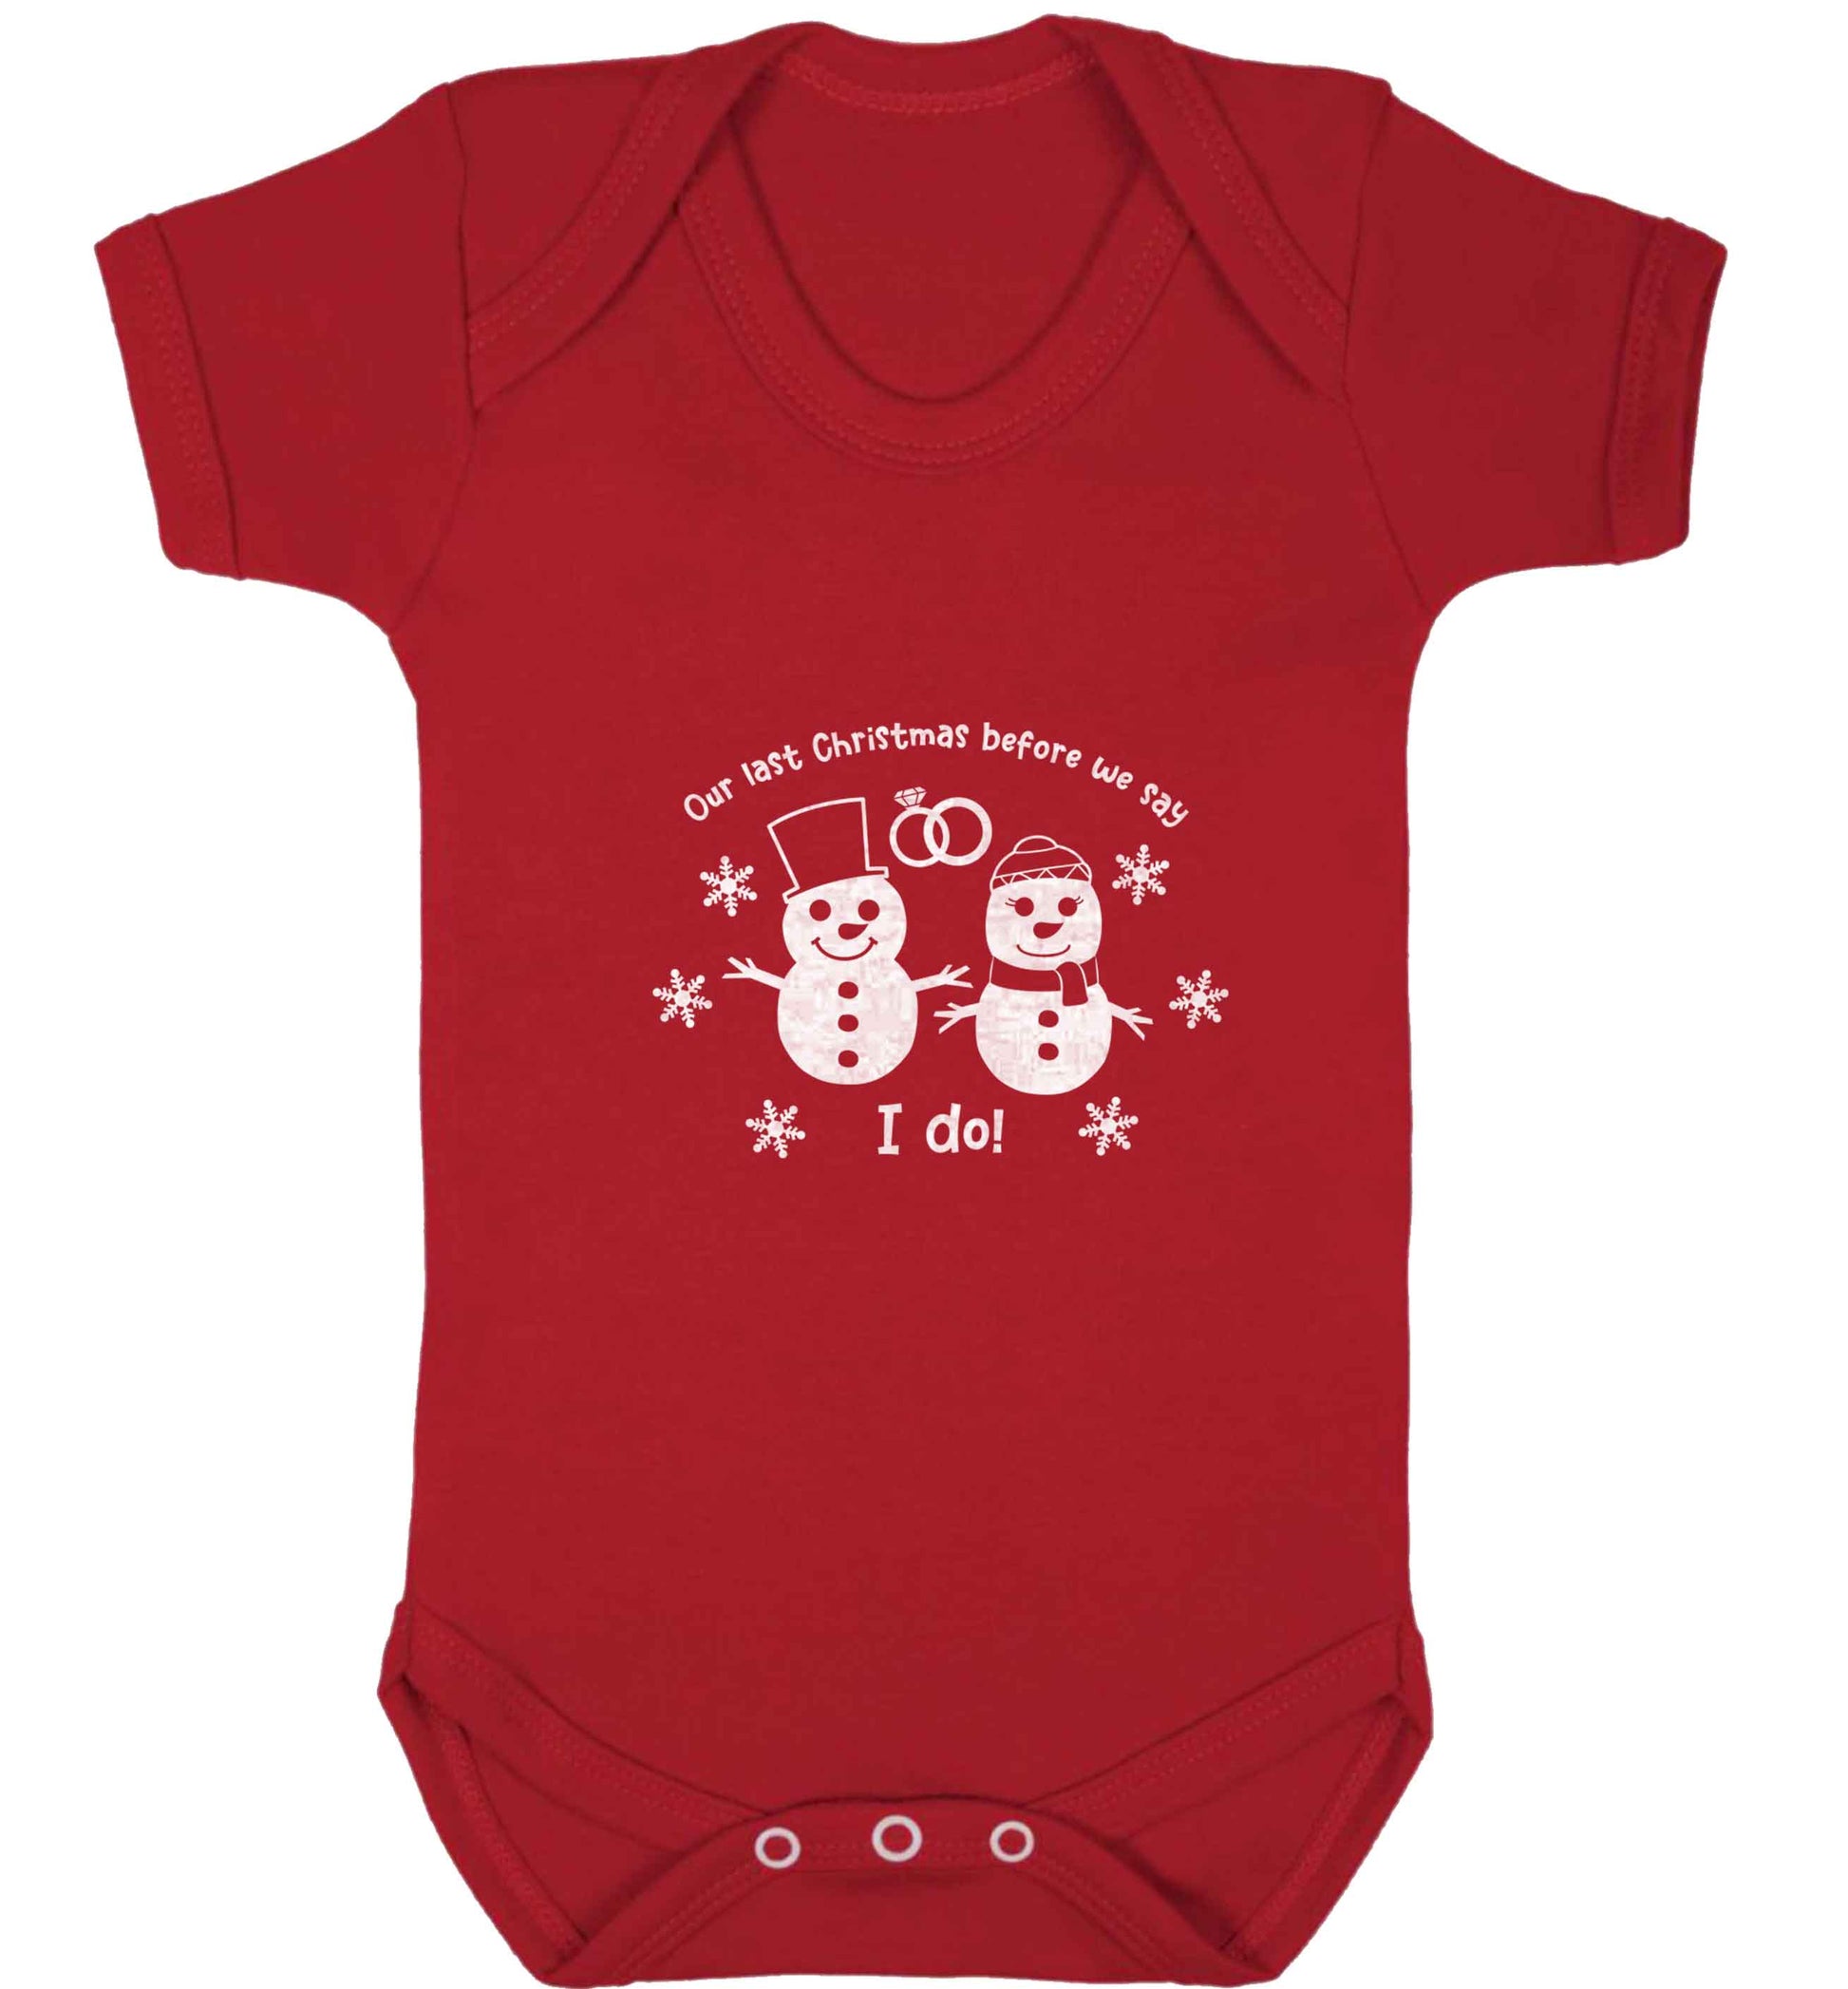 Last Christmas before we say I do baby vest red 18-24 months